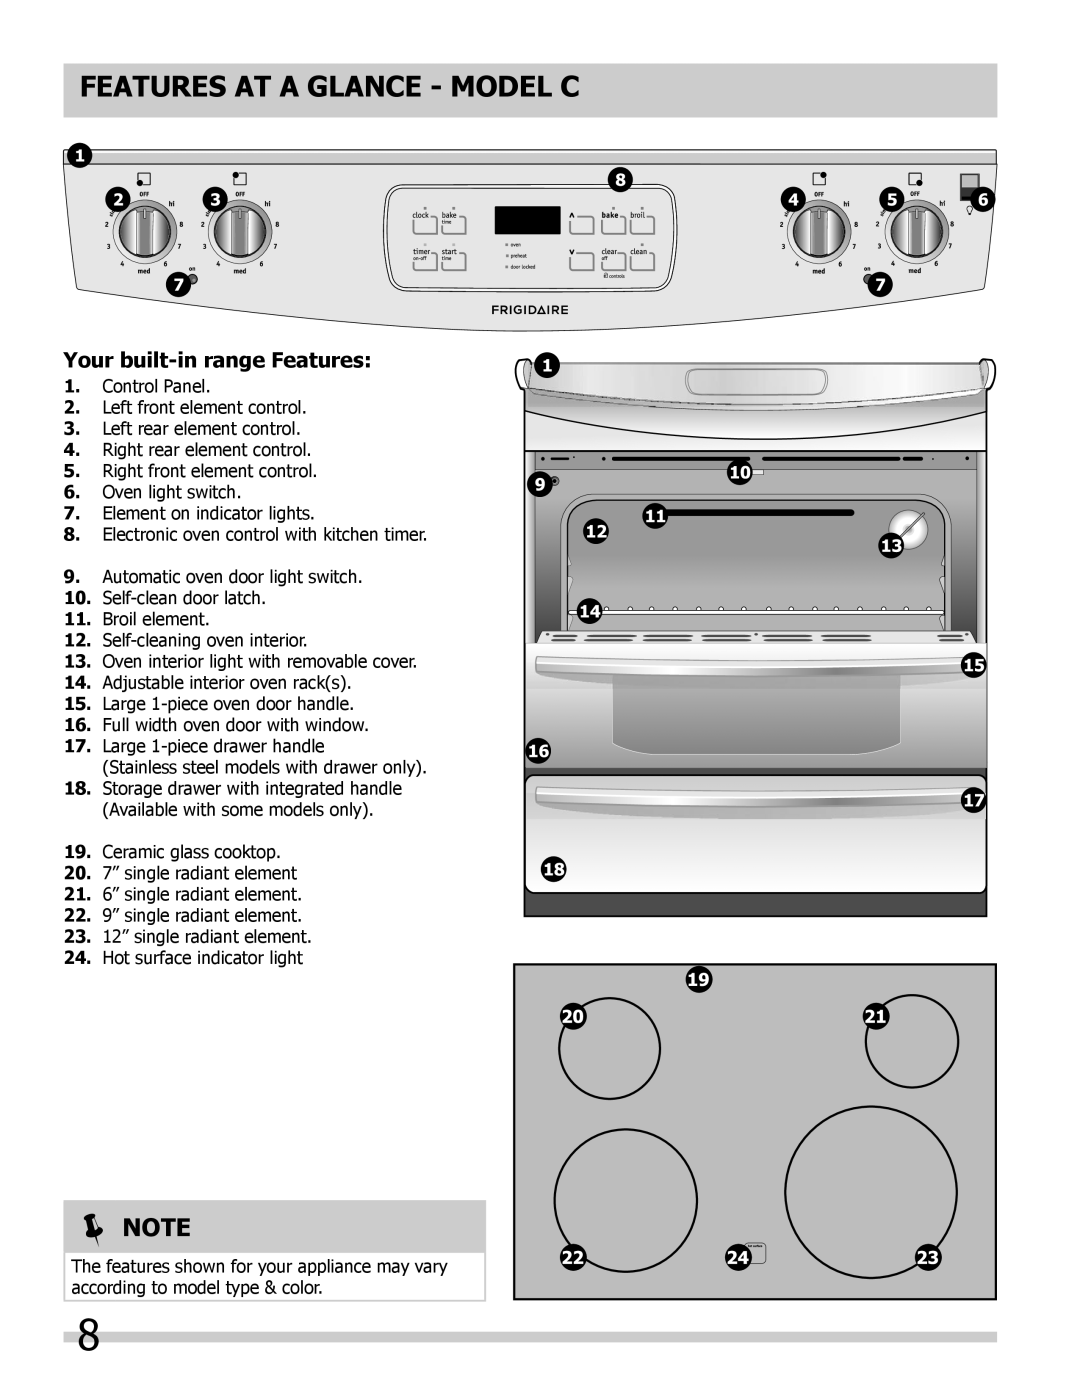 Frigidaire B manual FEATURES AT A GLANCE - mODEL C, Note, Your built-inrange Features 